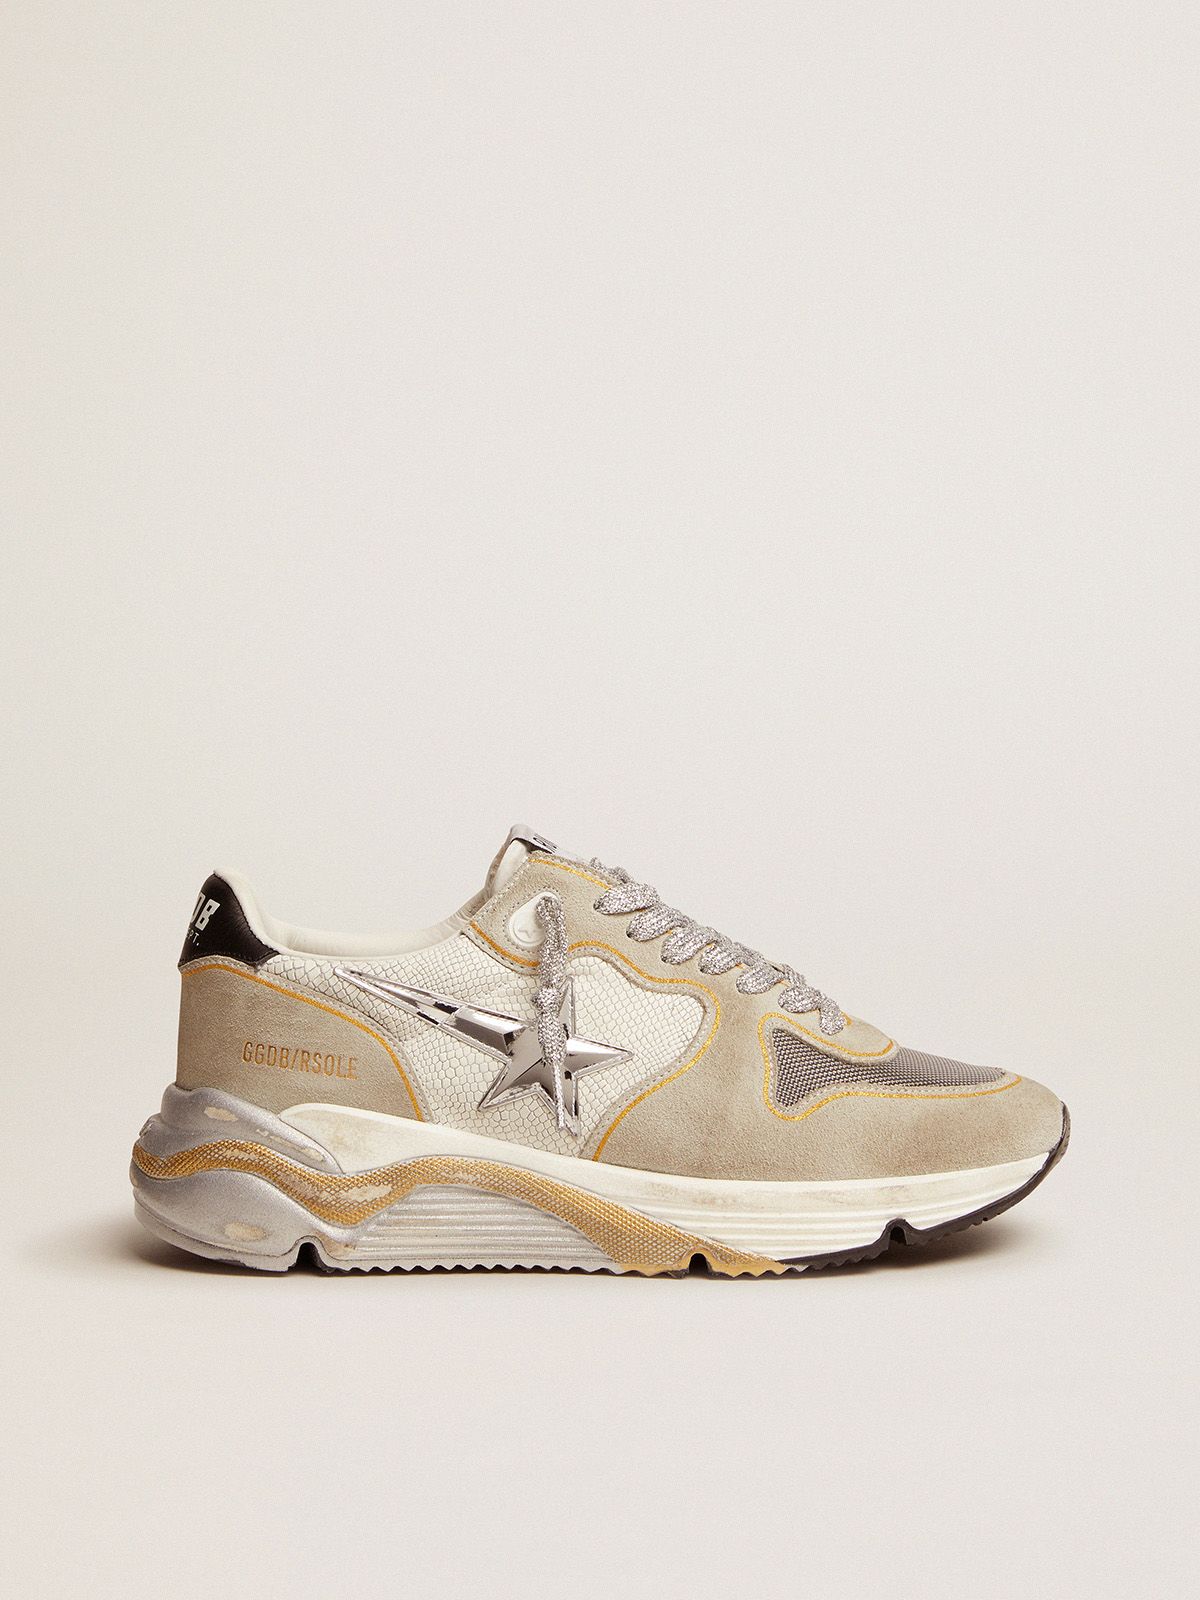 golden goose snake-print suede LTD Sole leather white Running insert mesh in and sneakers with